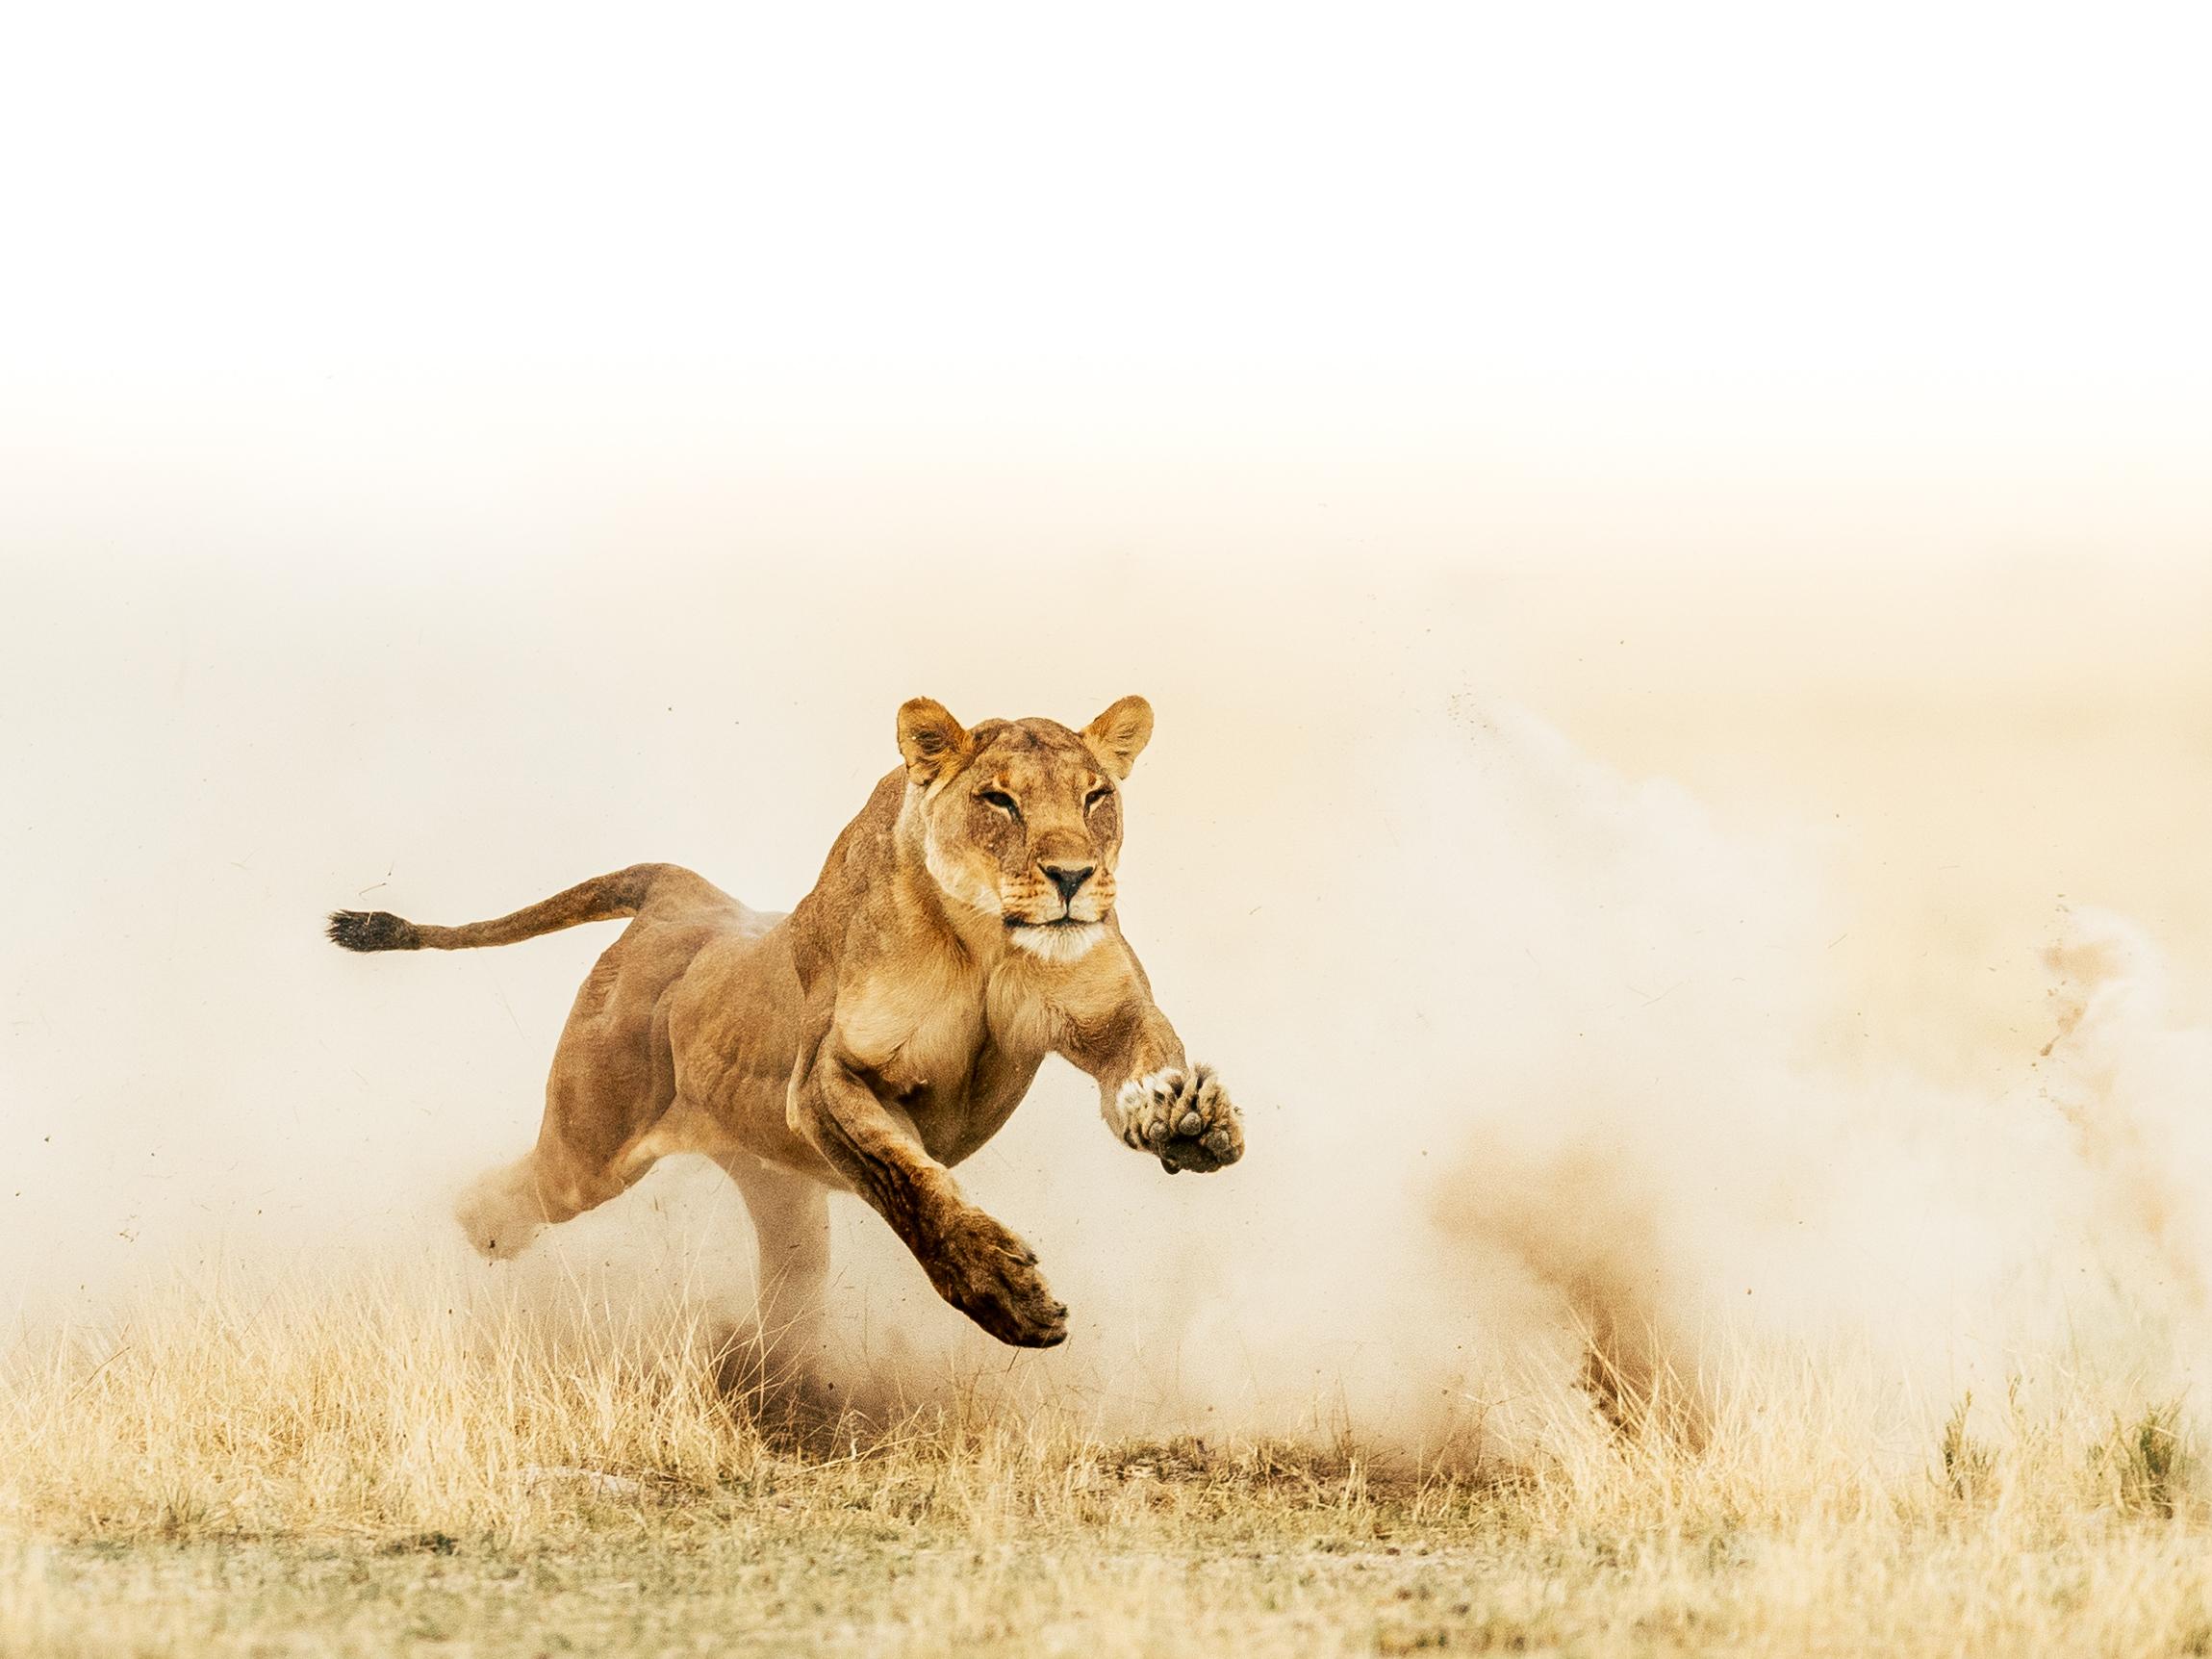 Interesting Photo of the Day: Charging Lioness in Namibia